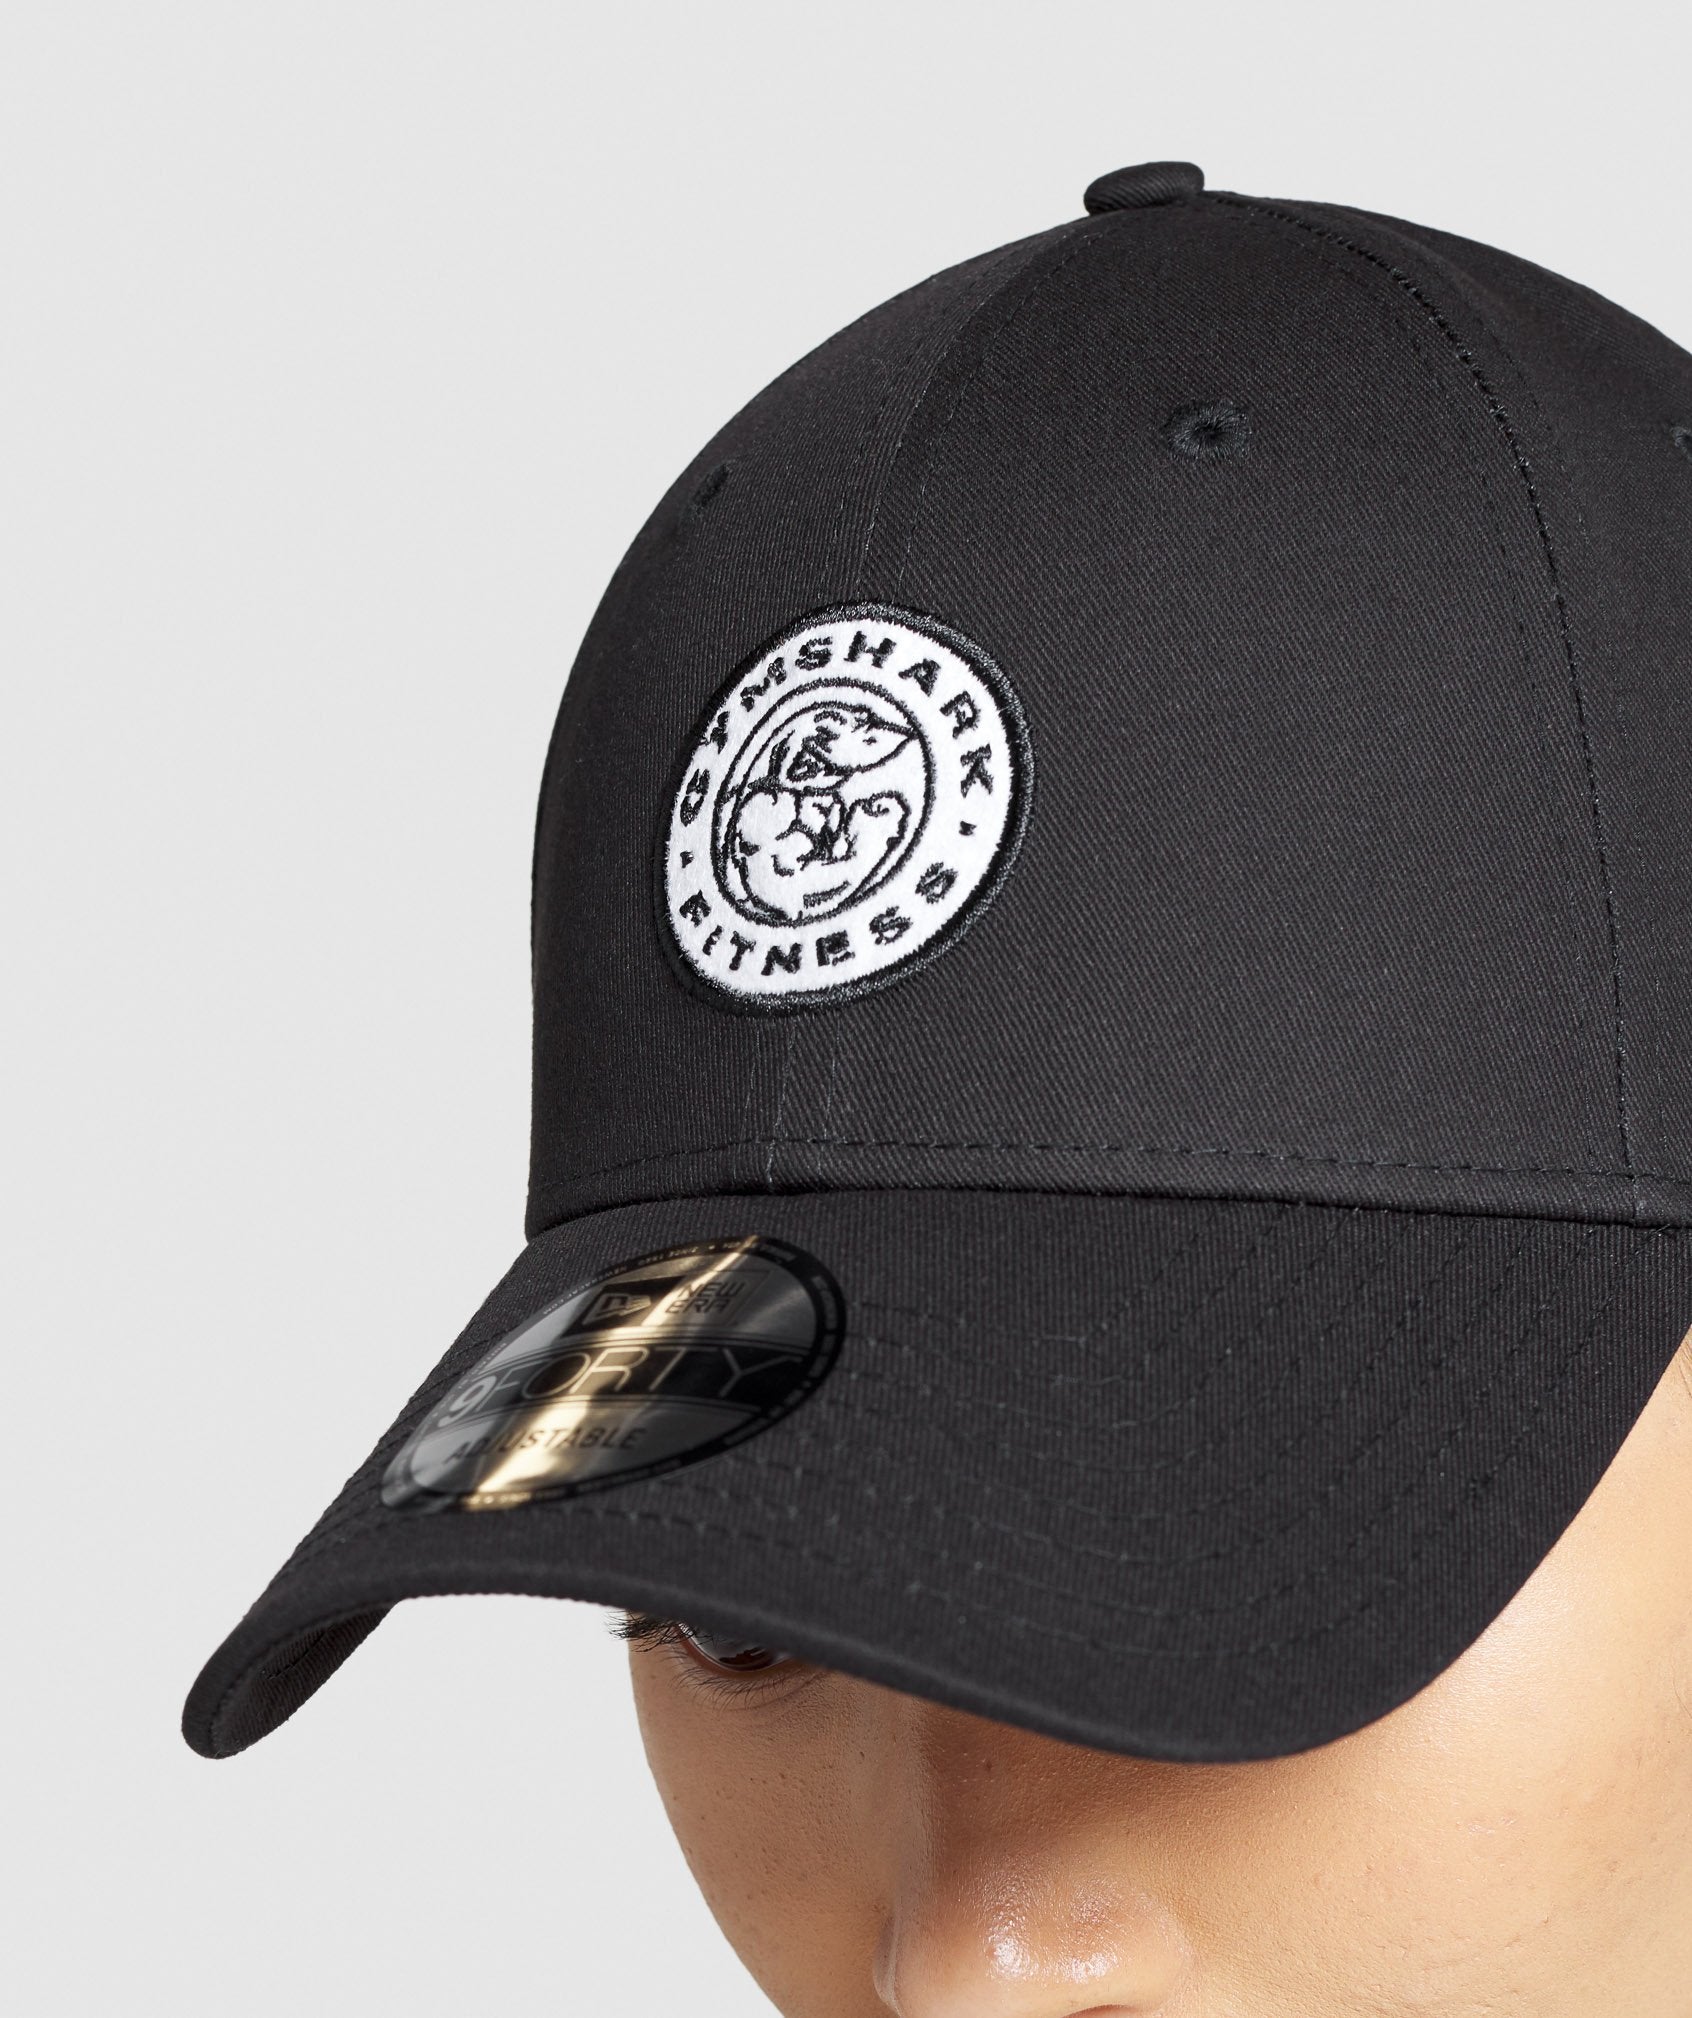 New Era Legacy 9Forty in Black - view 6